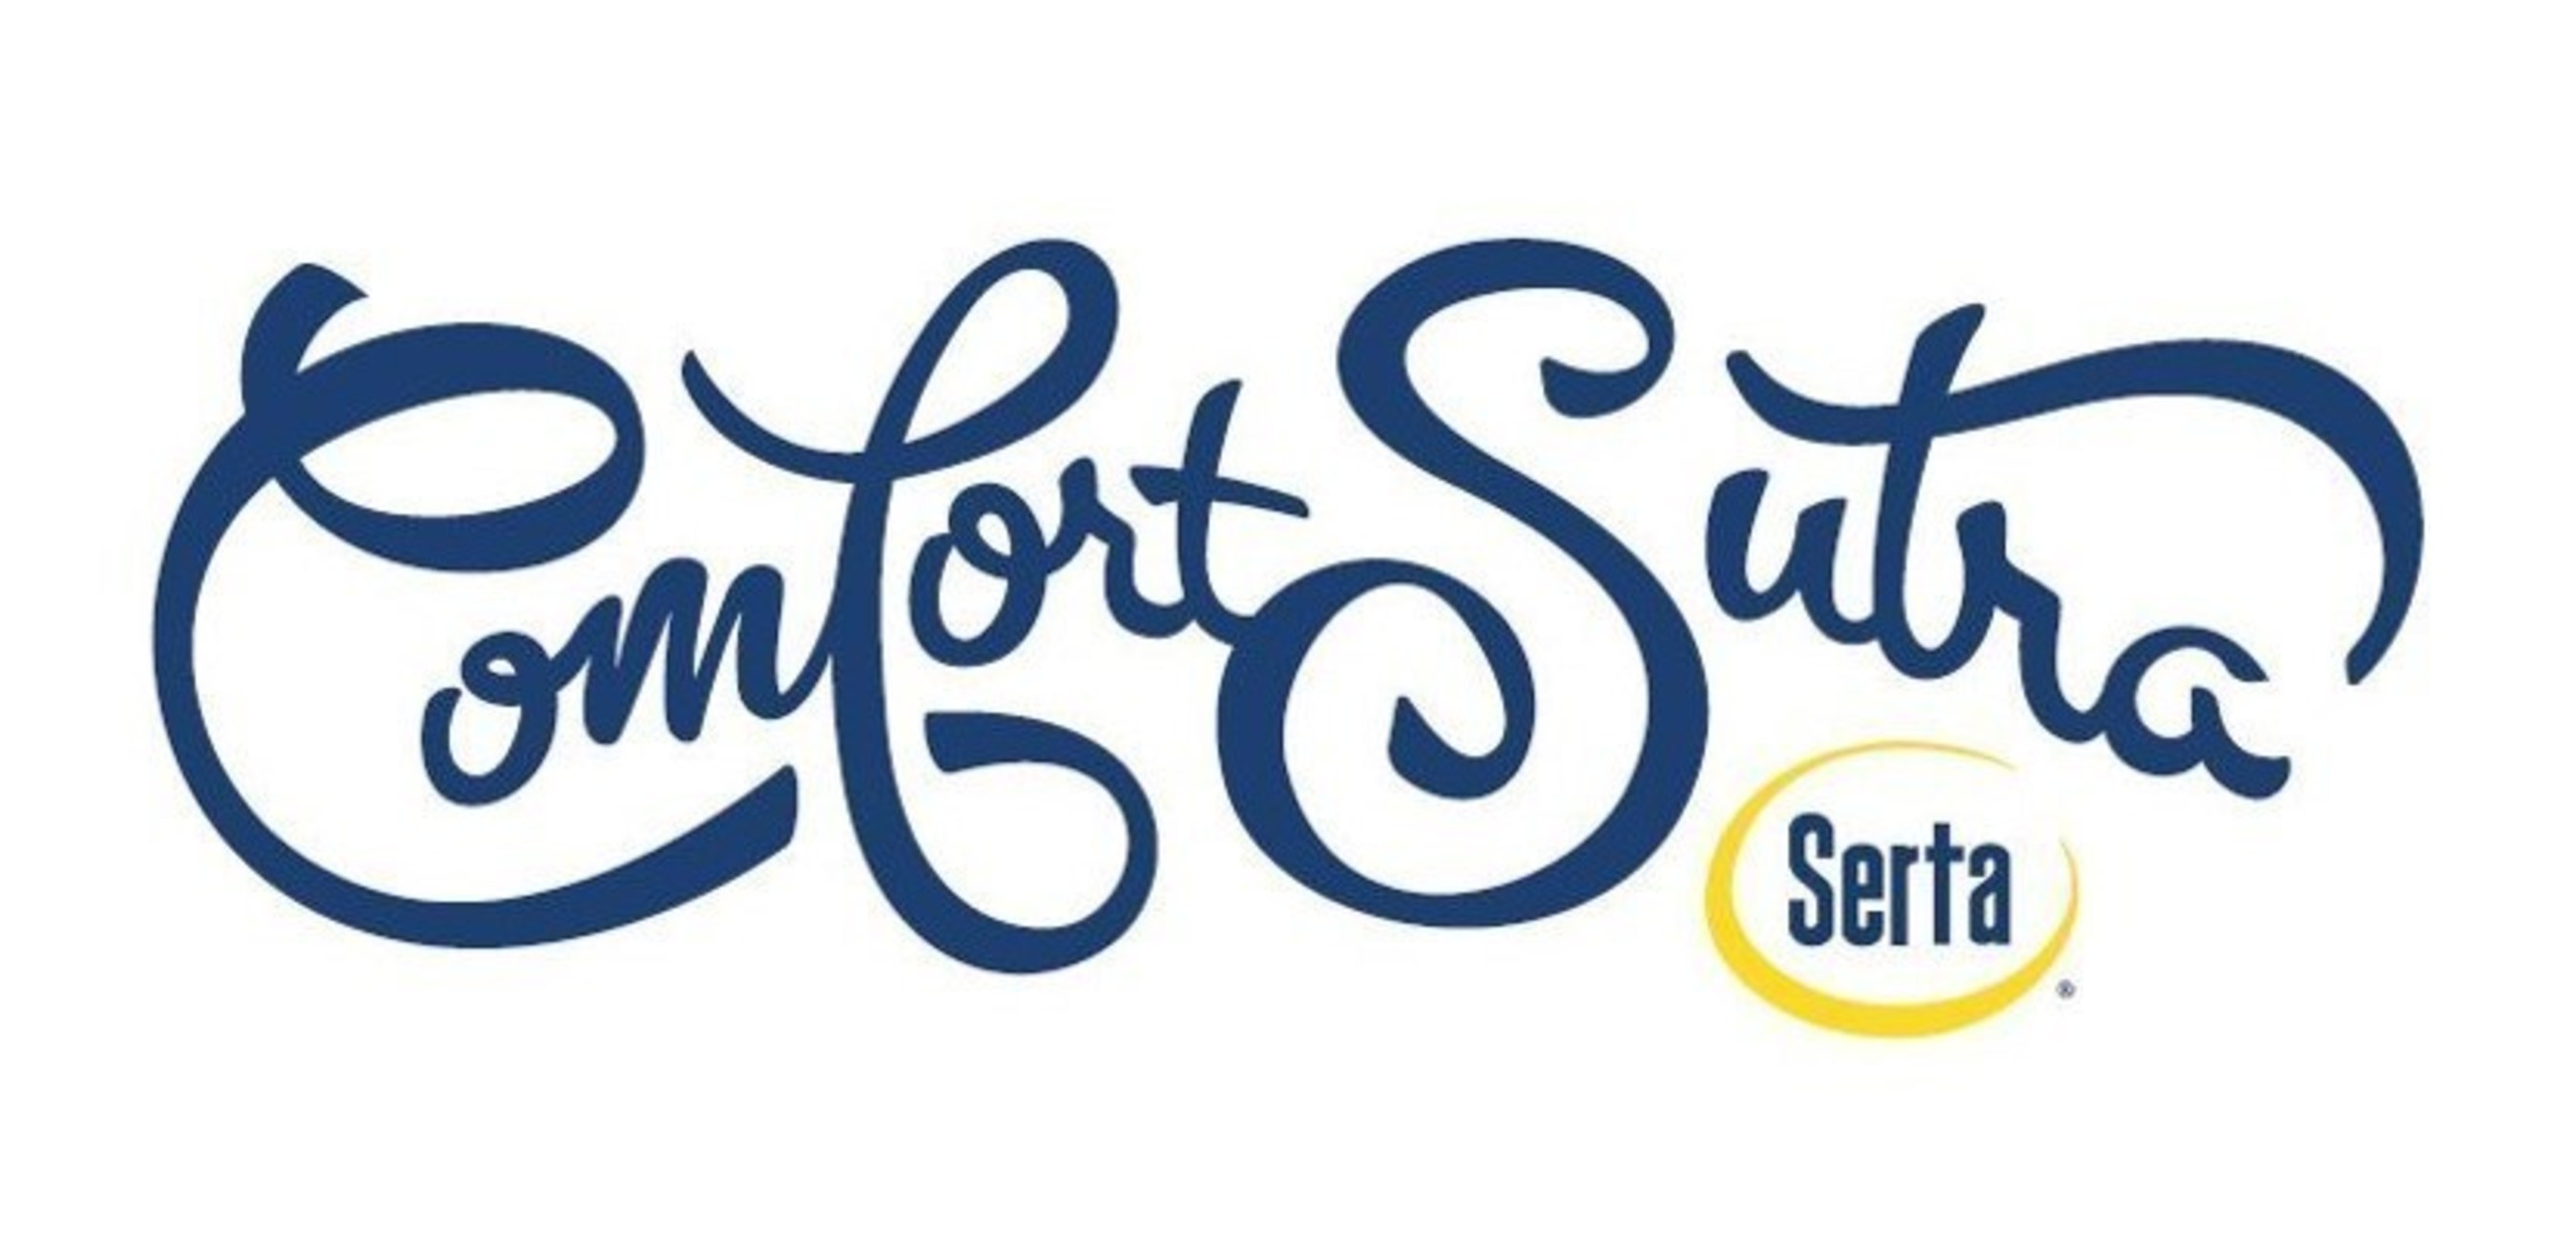 ComfortSutra is a provocative content series that will transform the way consumers get comfortable, providing new tips, tricks and positions to bring comfort back to the bedroom created by Serta with help from comedian Loni Love.